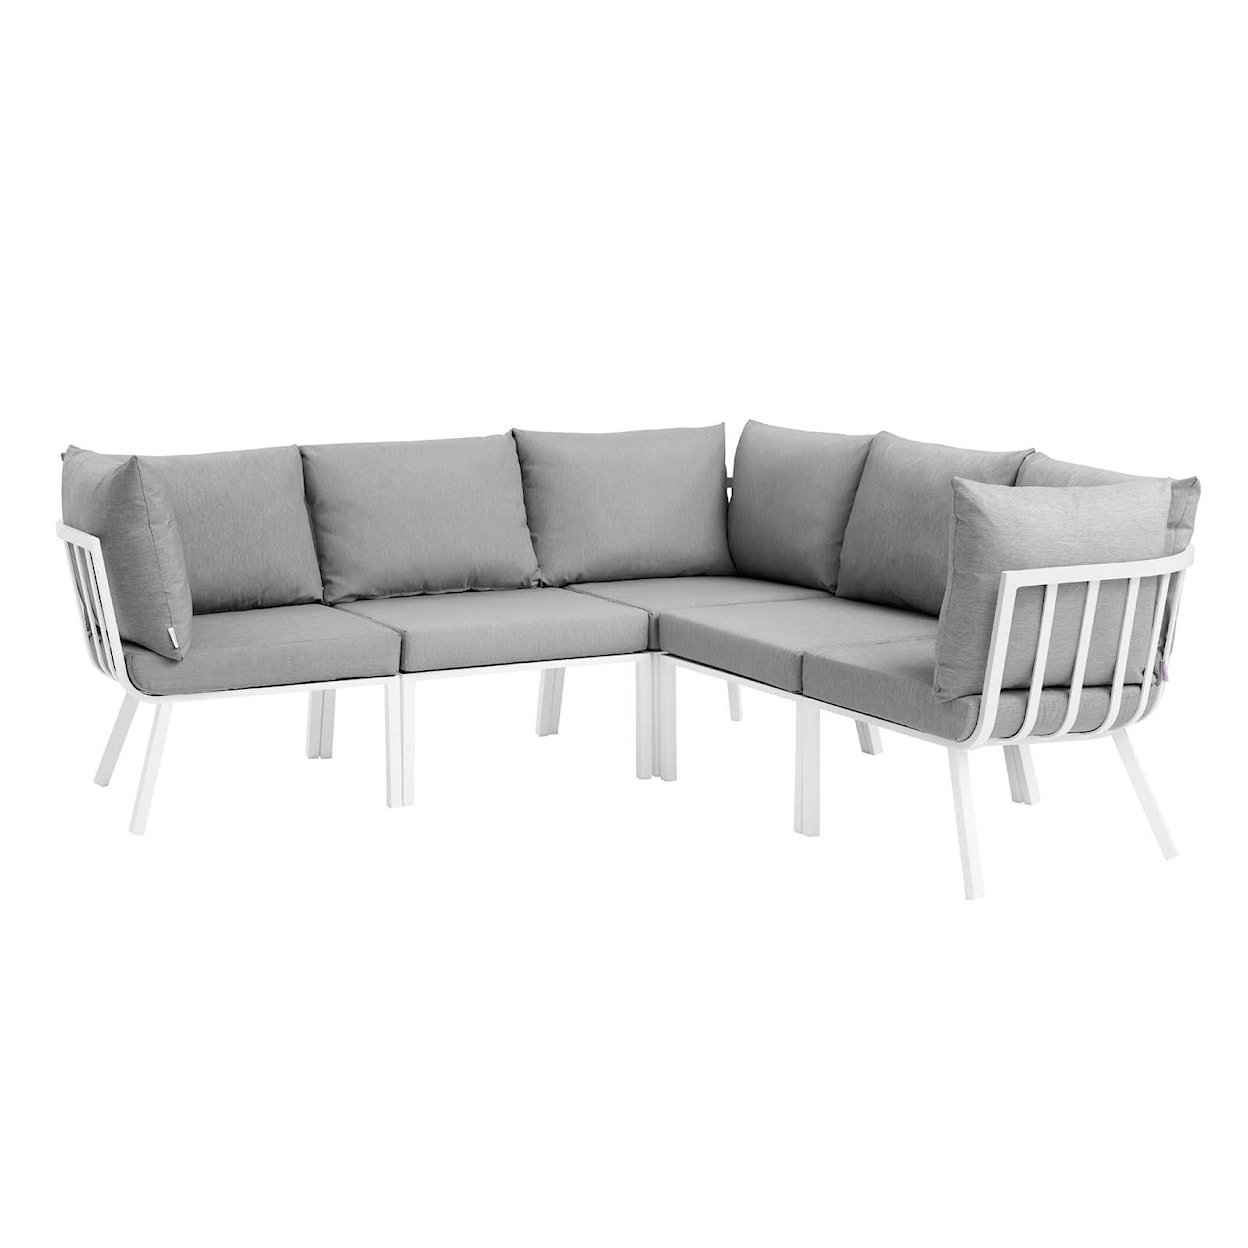 Modway Riverside Outdoor 5 Piece Sectional